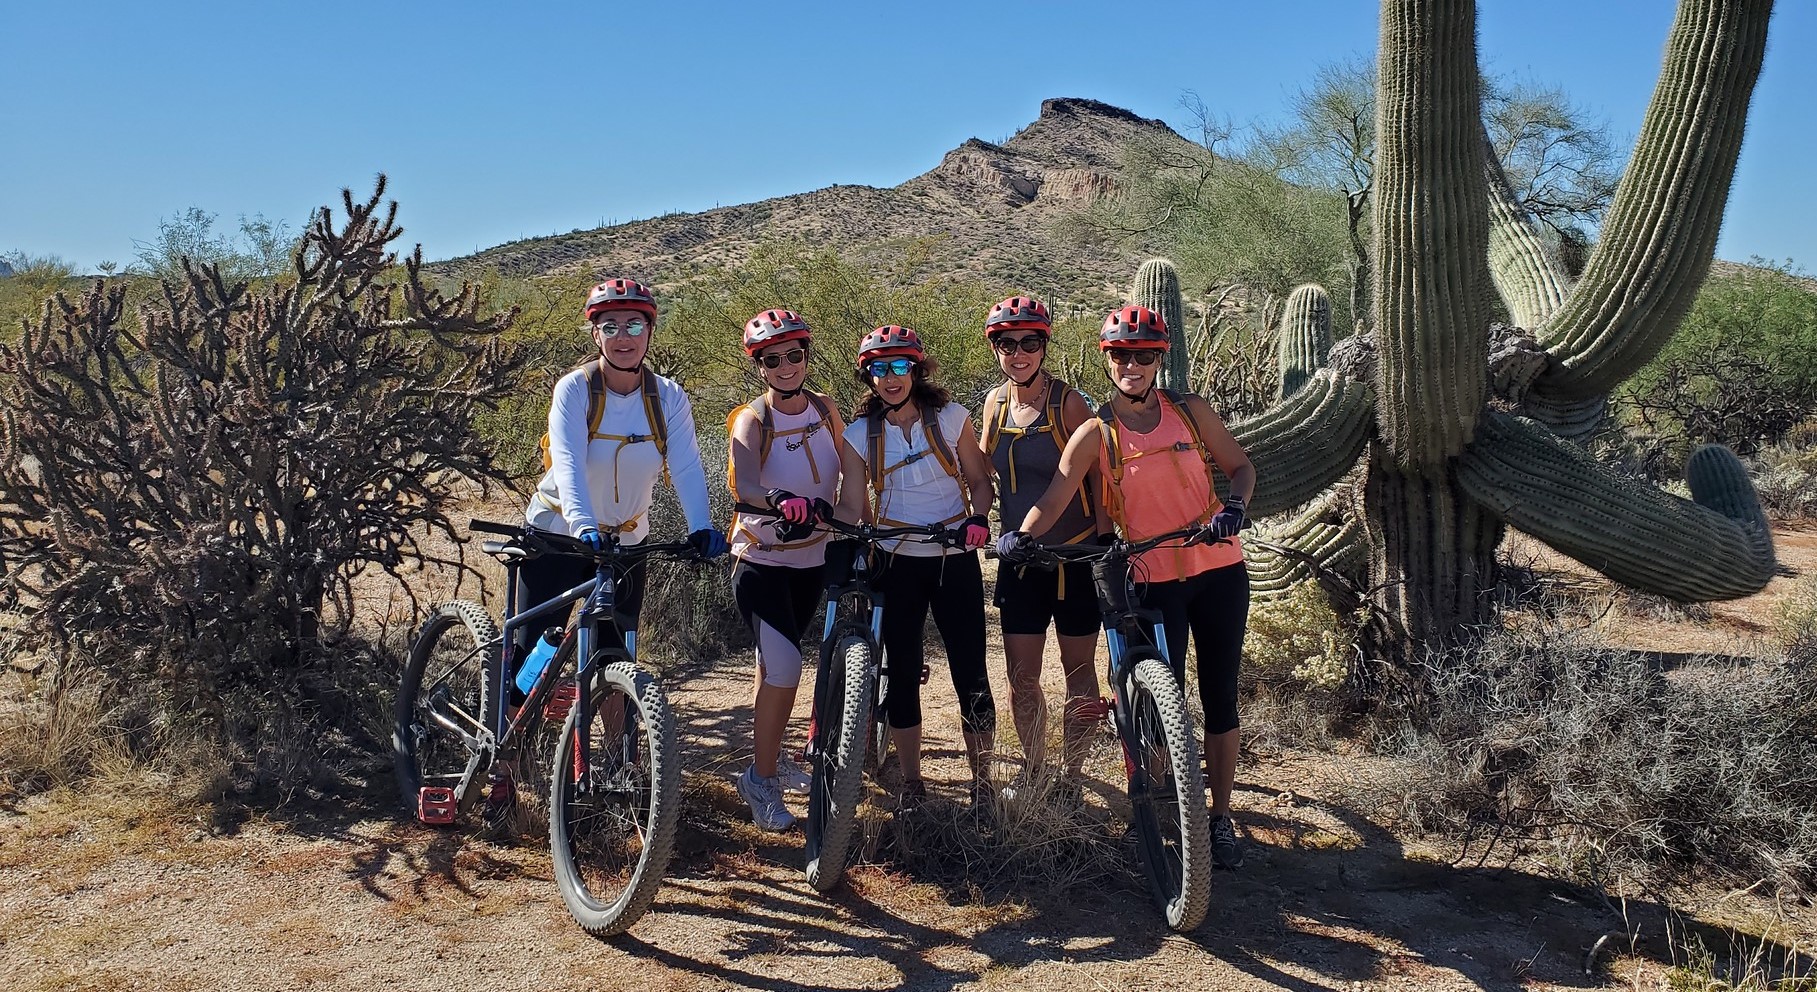 Five female friends pause during a Wild Bunch Desert Guides mountain bike ride in Scottsdale for a picturesque photo next to a cactus with a rocky cliff facing as the breathtaking backdrop. The Thanksgiving holiday only helps to remind that friends and family are among the most cherished blessings to celebrate.